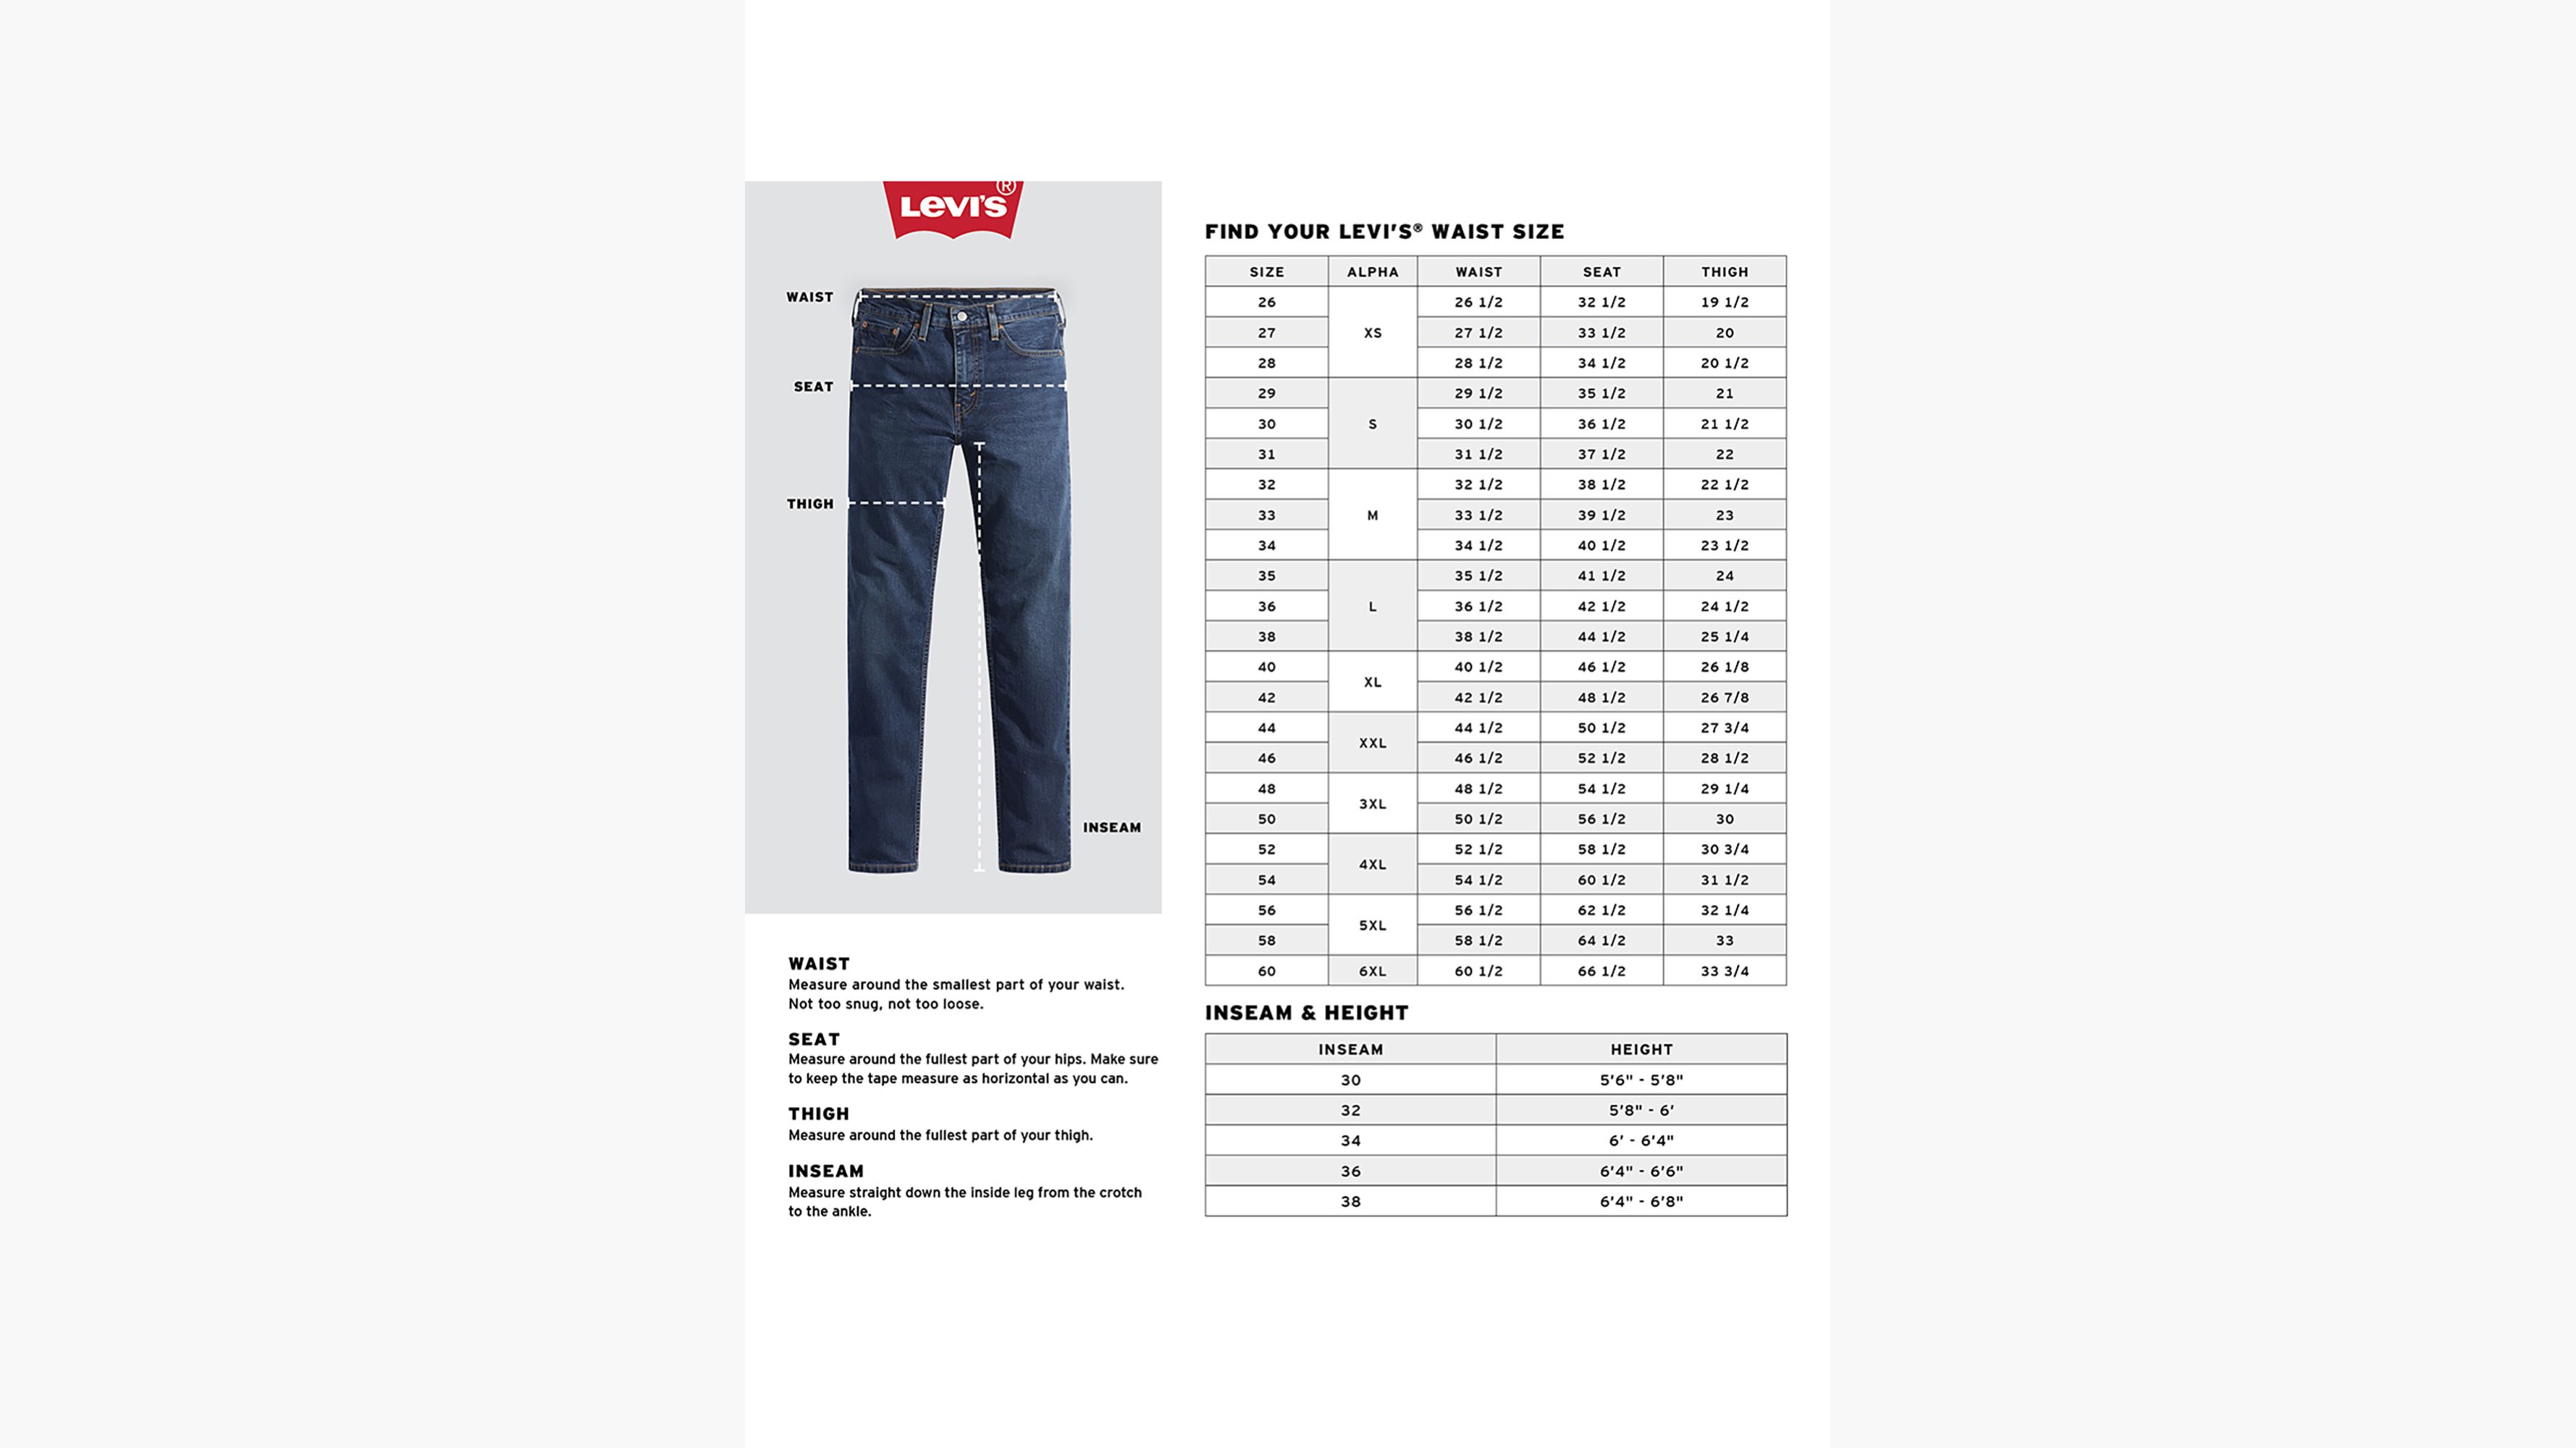 550™ Relaxed Fit Men's Jeans - Dark Wash